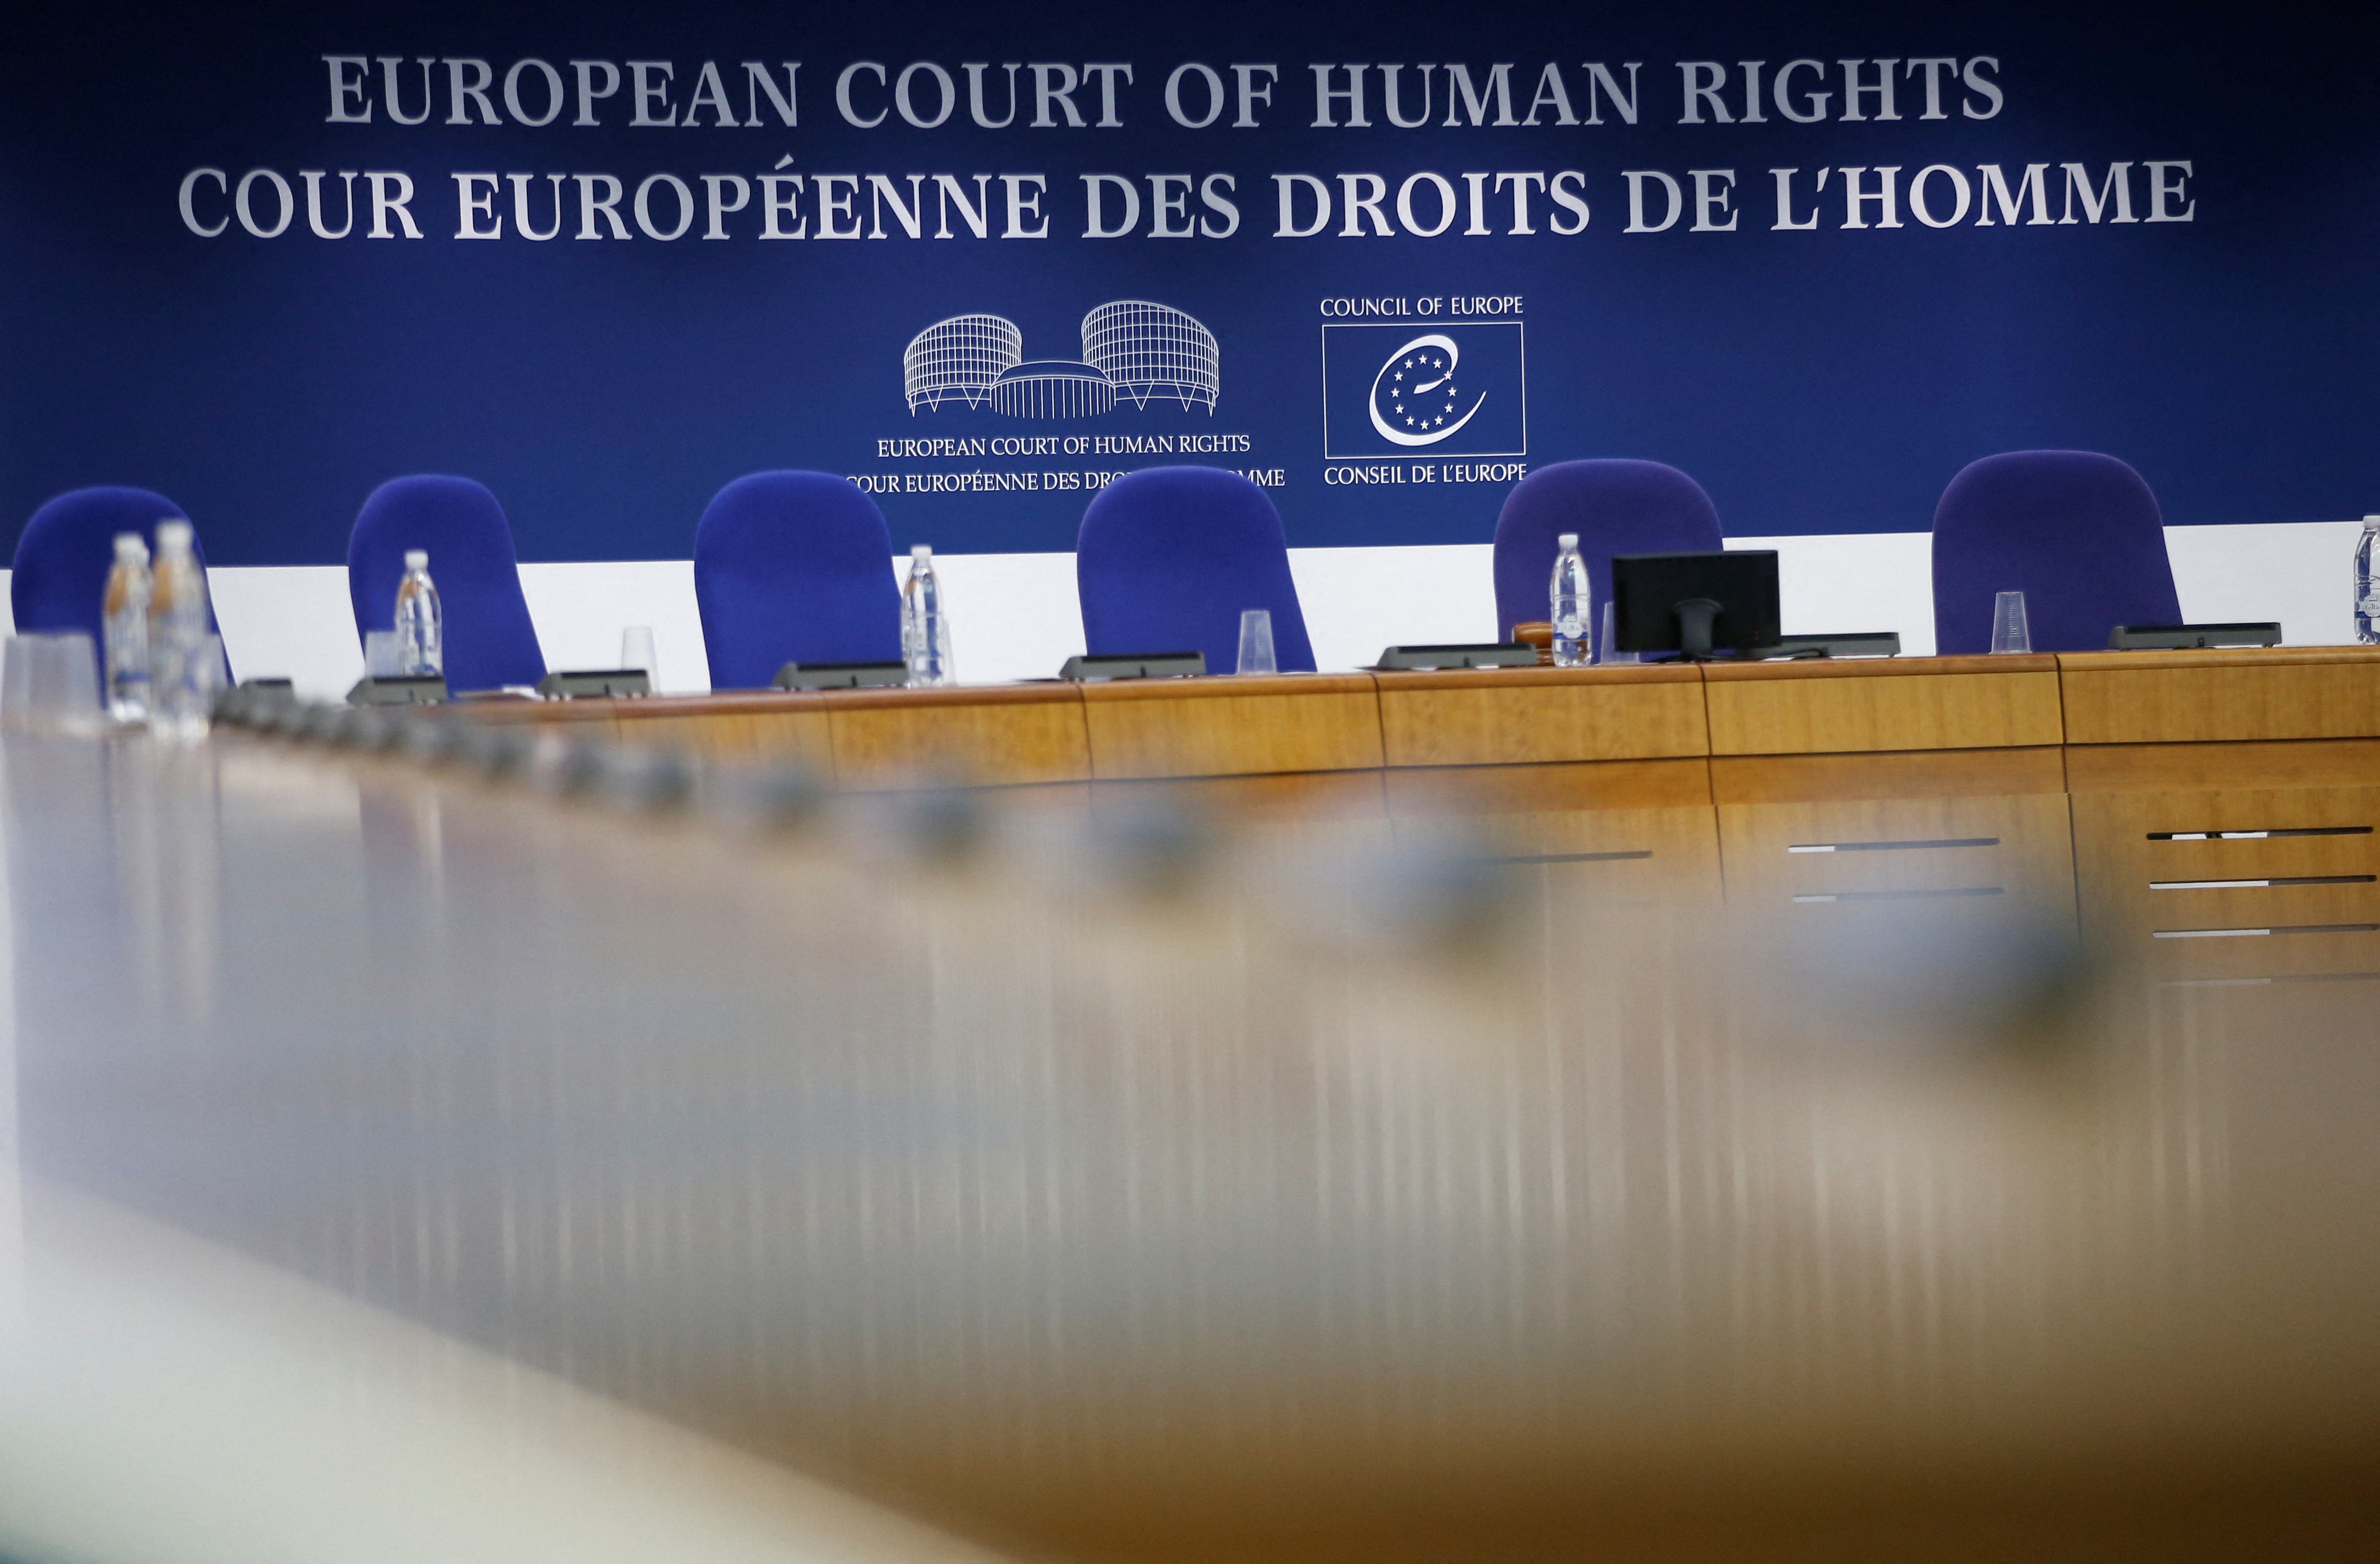 The courtroom of the European Court of Human Rights is seen at Strasbourg